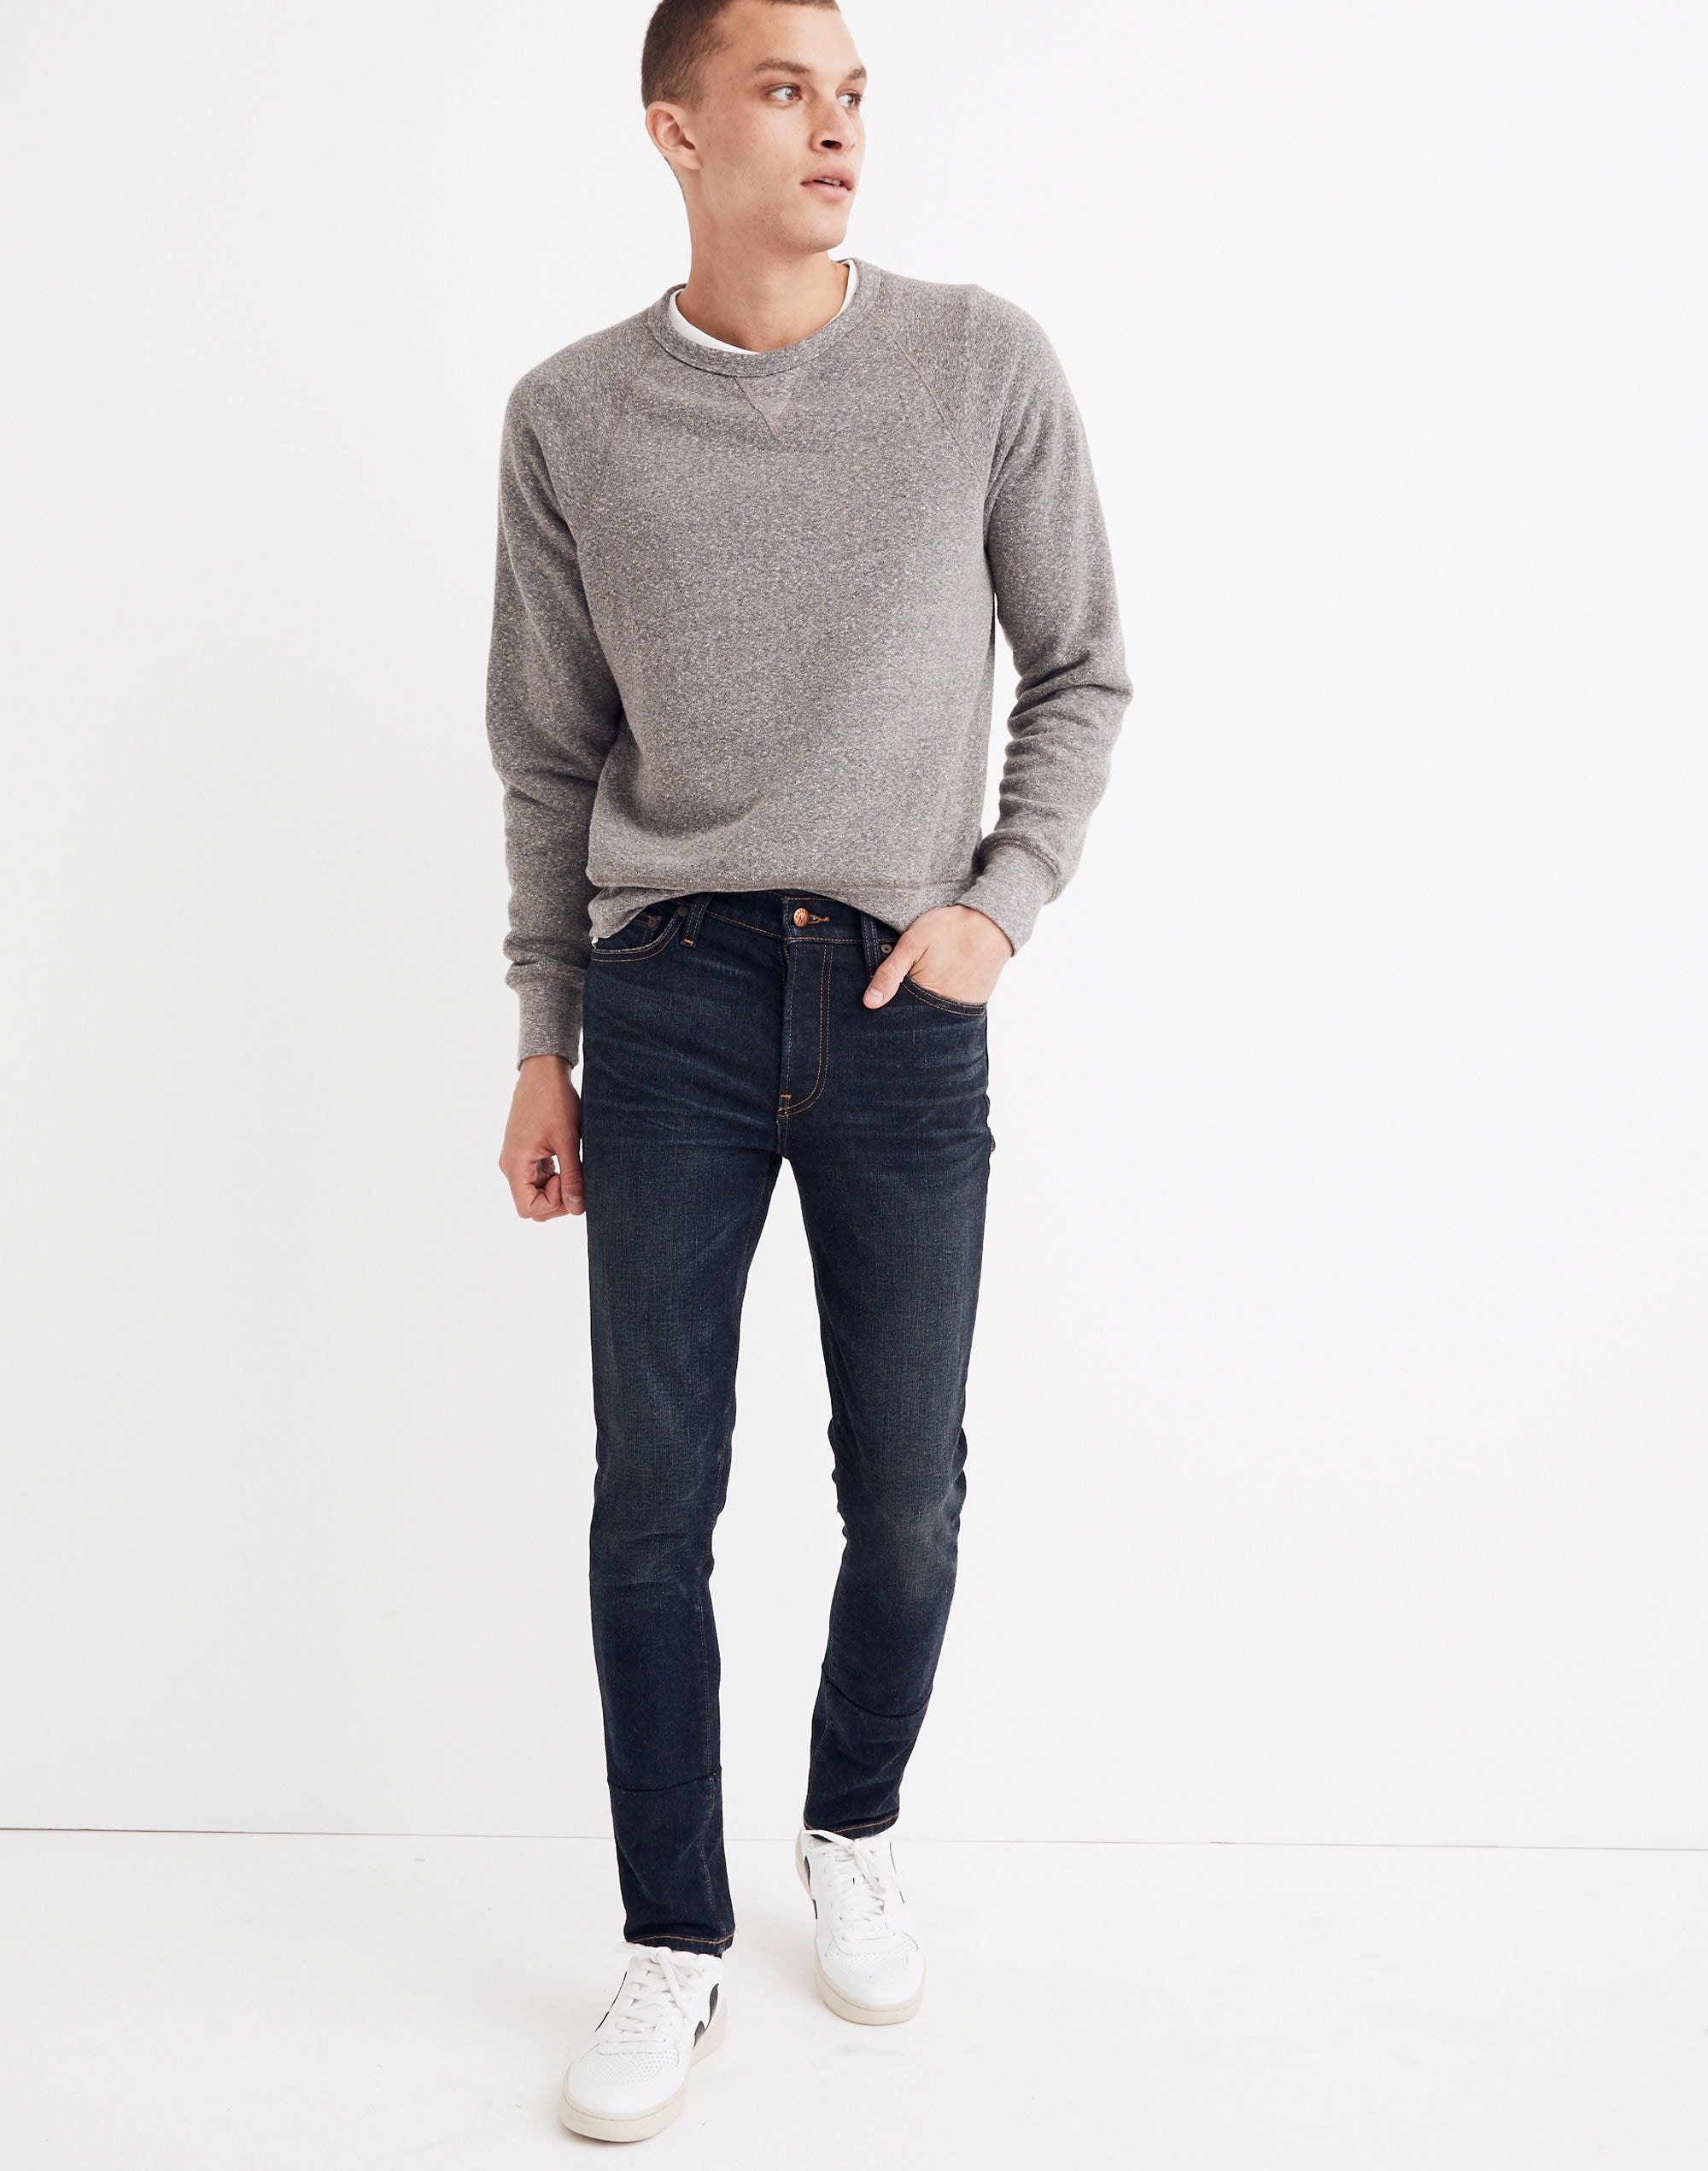 Men's Skinny Authentic Flex Jeans in Heney Wash | Madewell